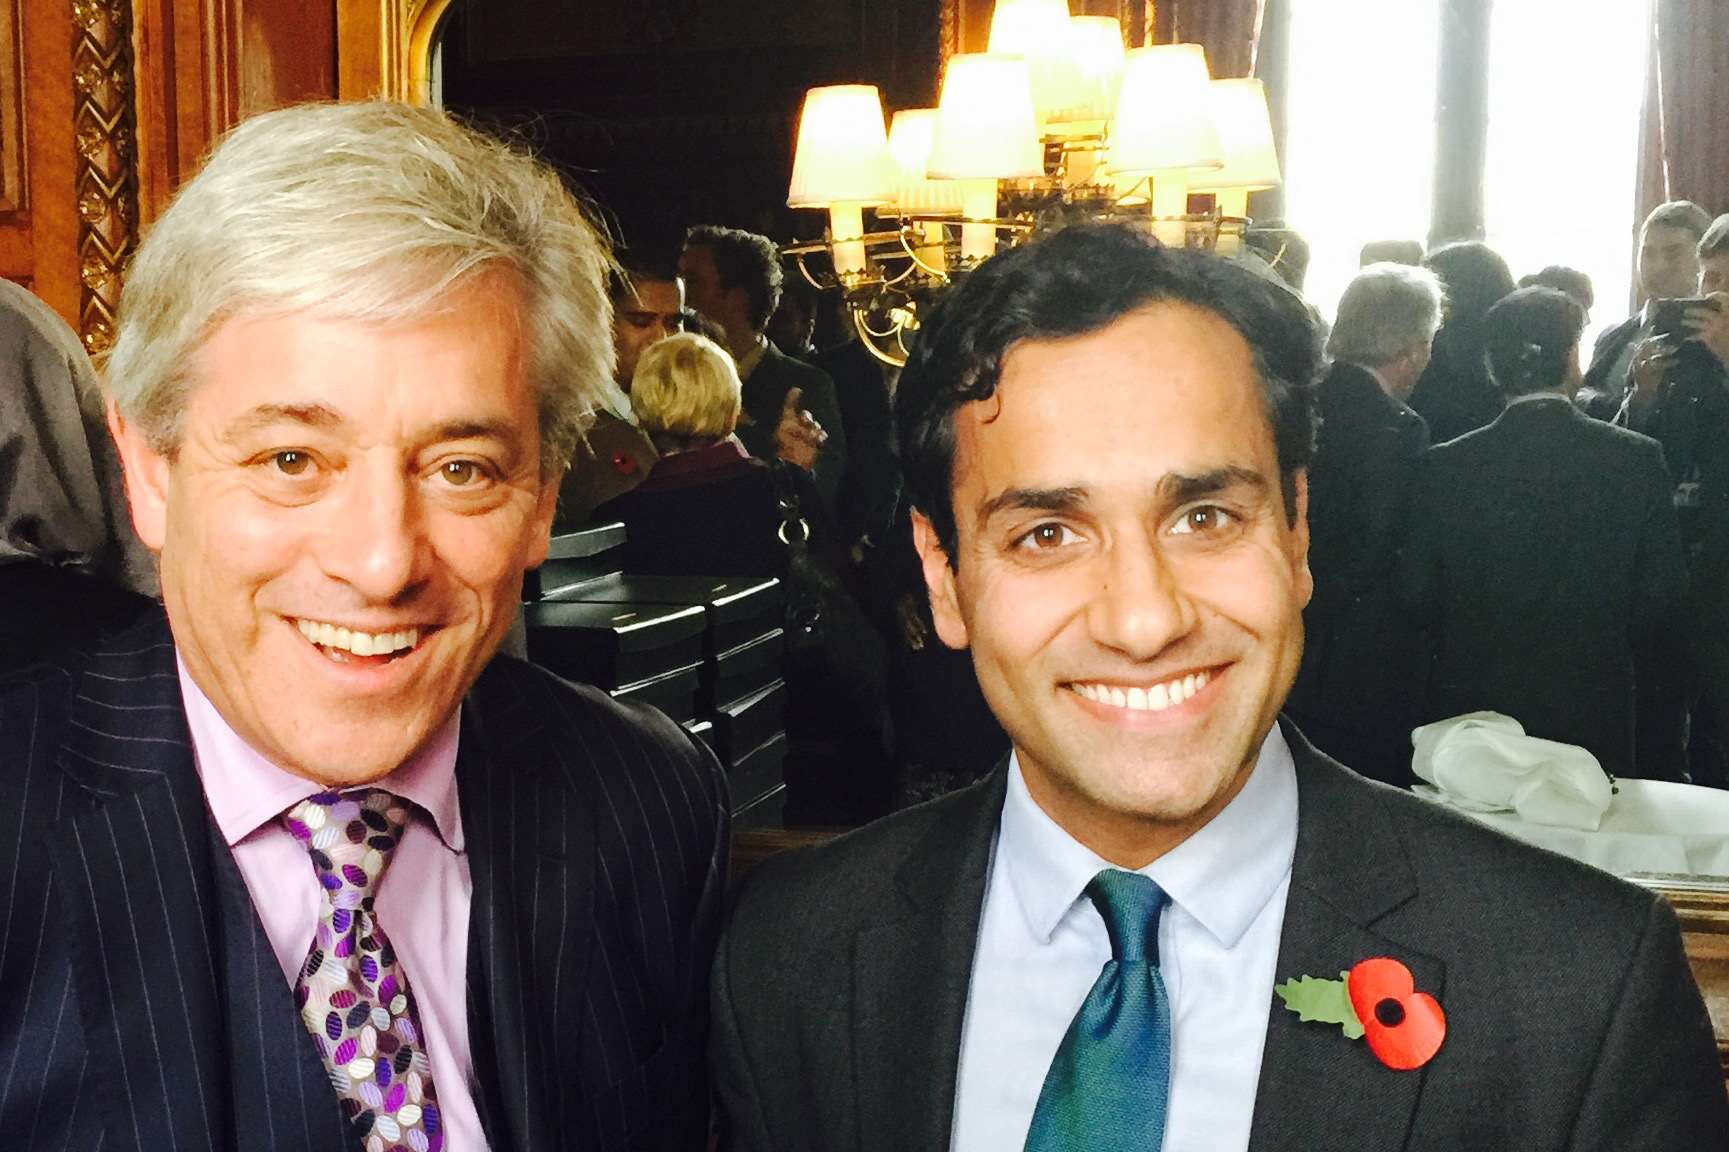 Rehman Chishti MP with the Speaker of the House John Bercow MP.